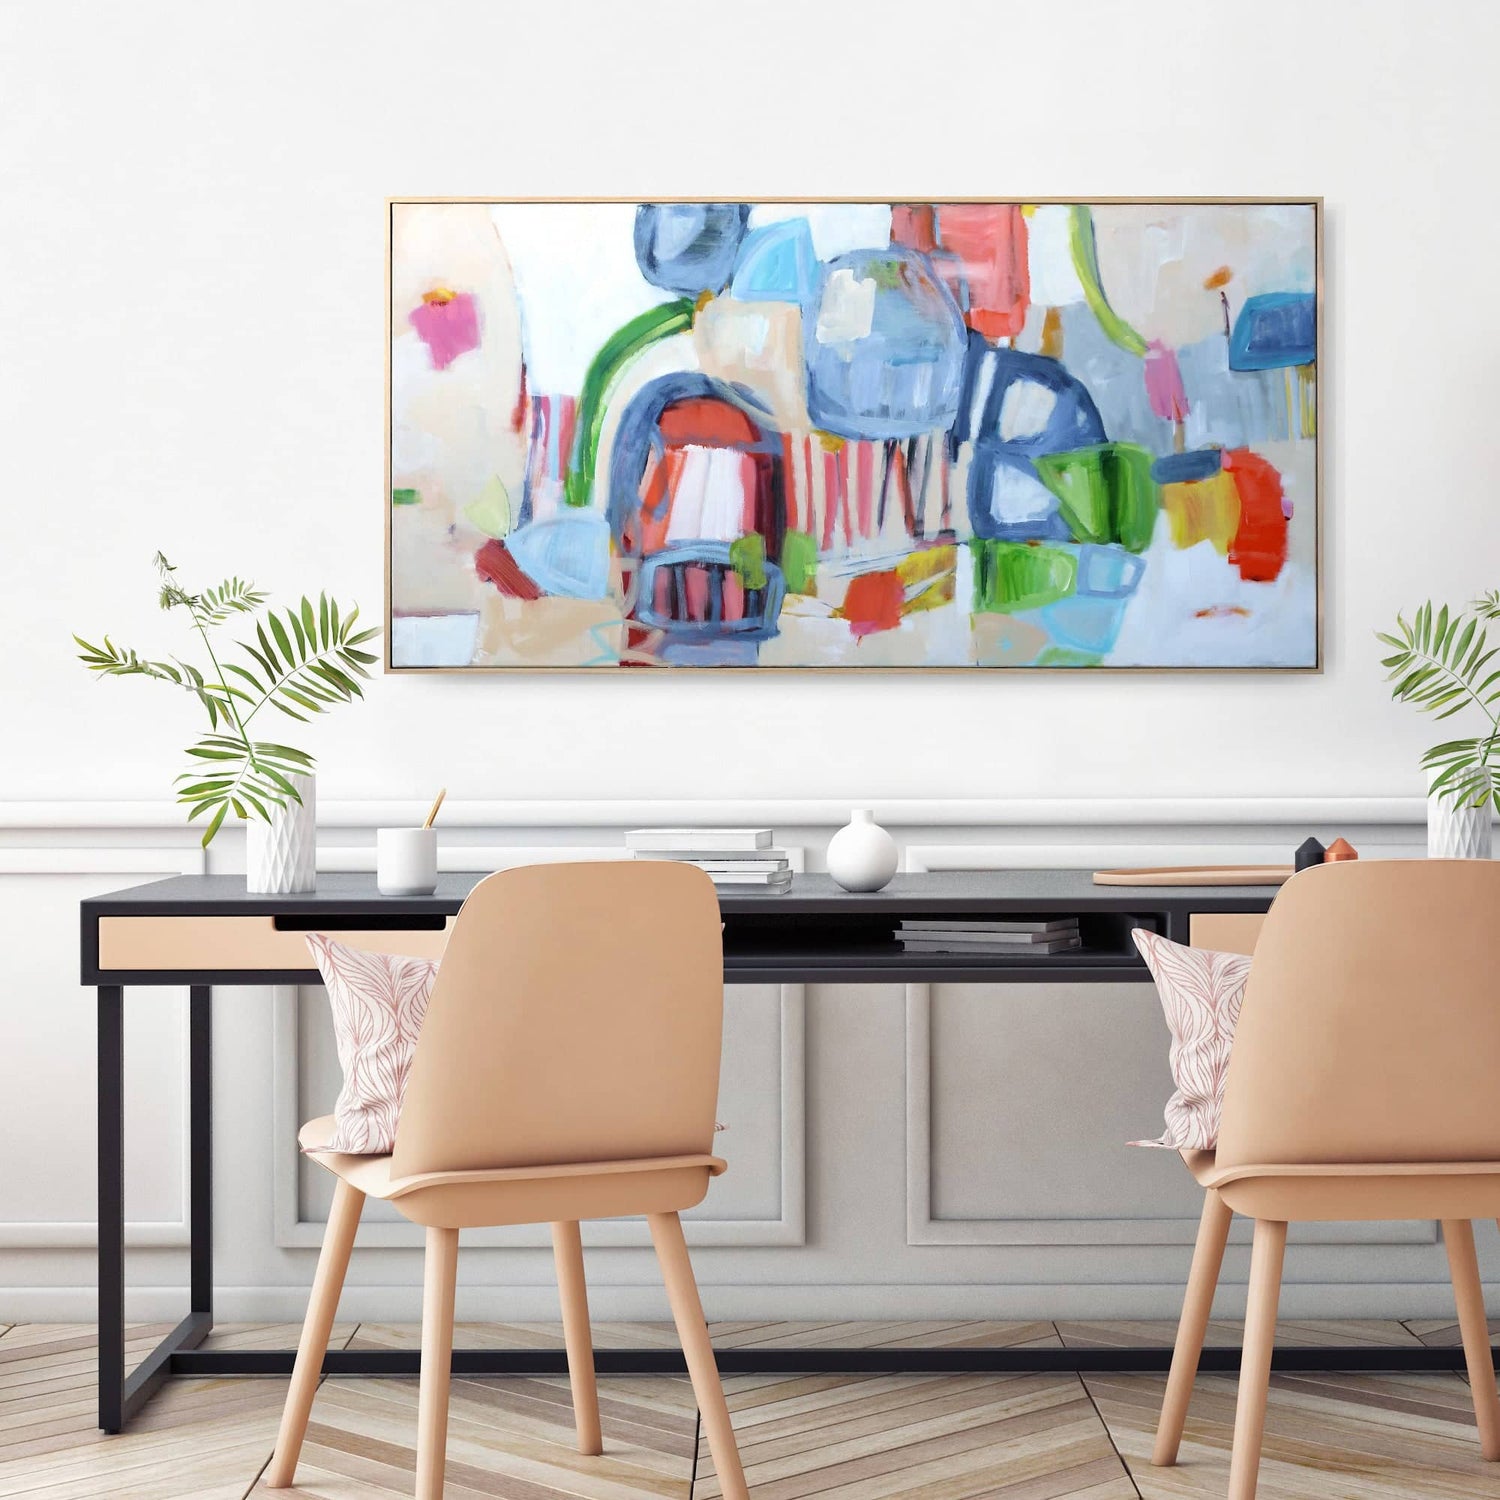 original abstract paintings, nz abstract art, new zealand abstract art, original art for sale nz, large paintings for sale nz, nz artists paintings for sale